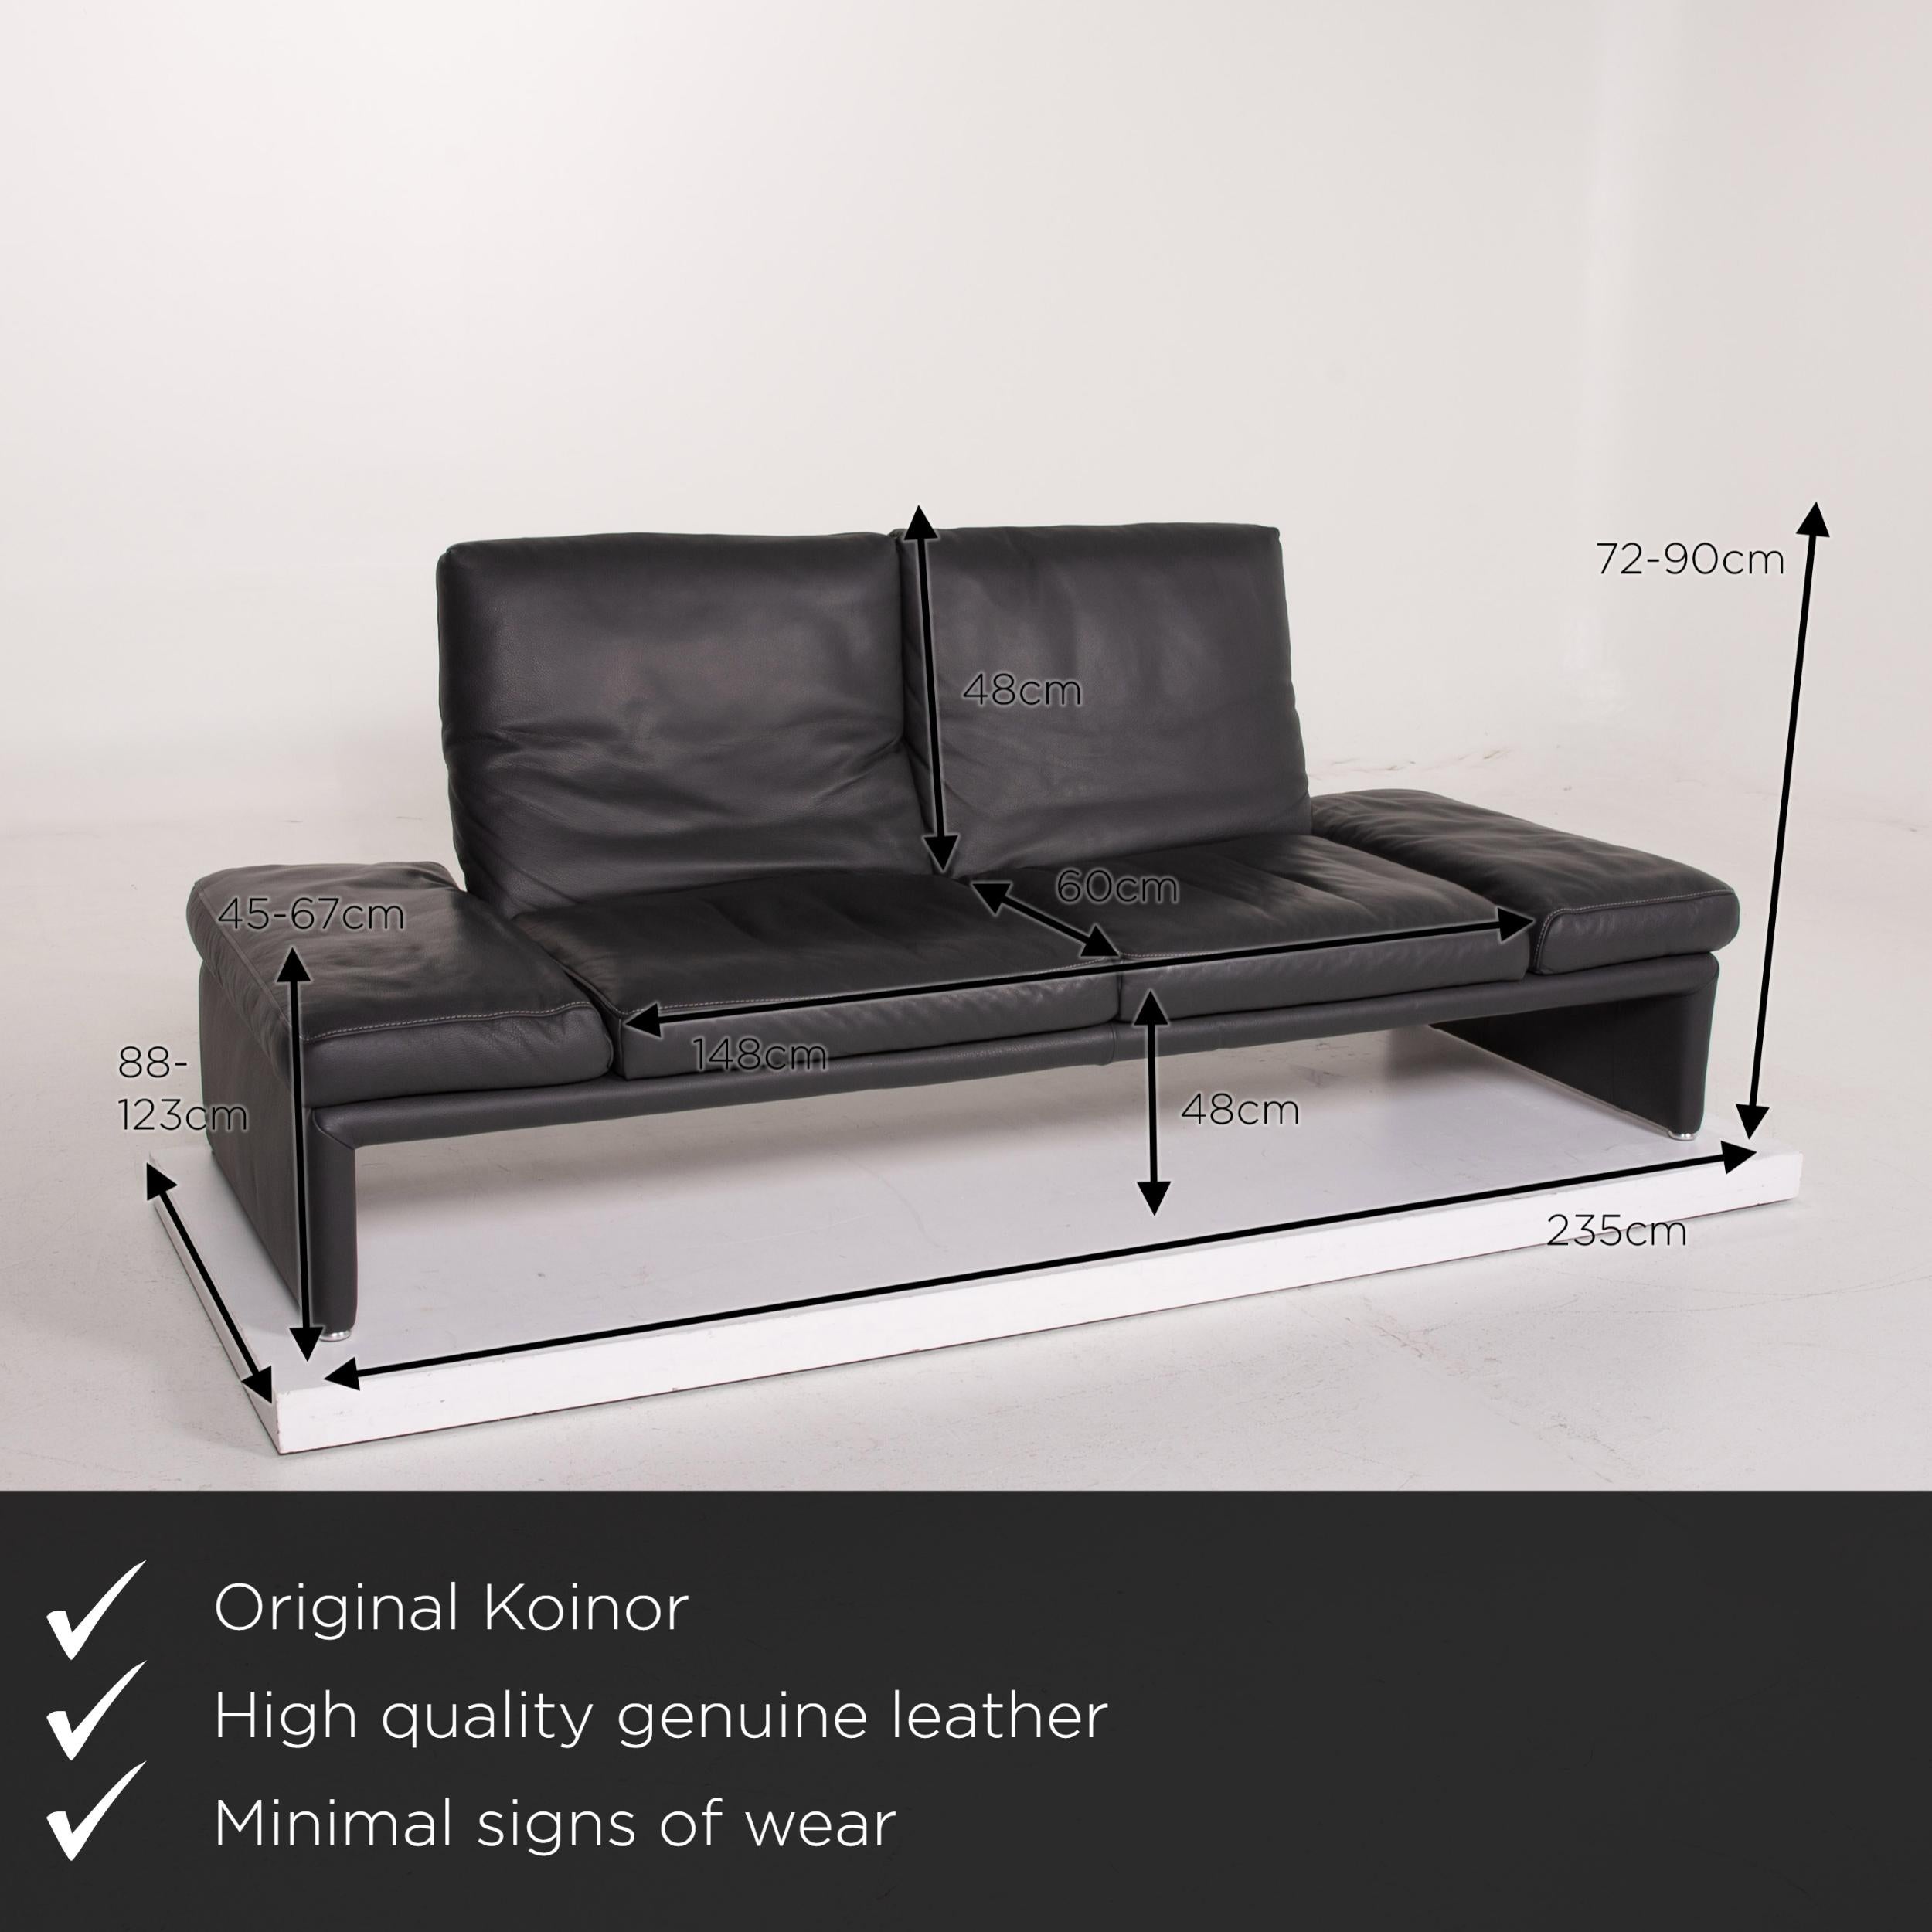 We present to you a Koinor Raoul leather sofa anthracite two-seat function.

 

 Product measurements in centimeters:
 

Depth 88
Width 235
Height 72
Seat height 48
Rest height 45
Seat depth 60
Seat width 148
Back height 48.